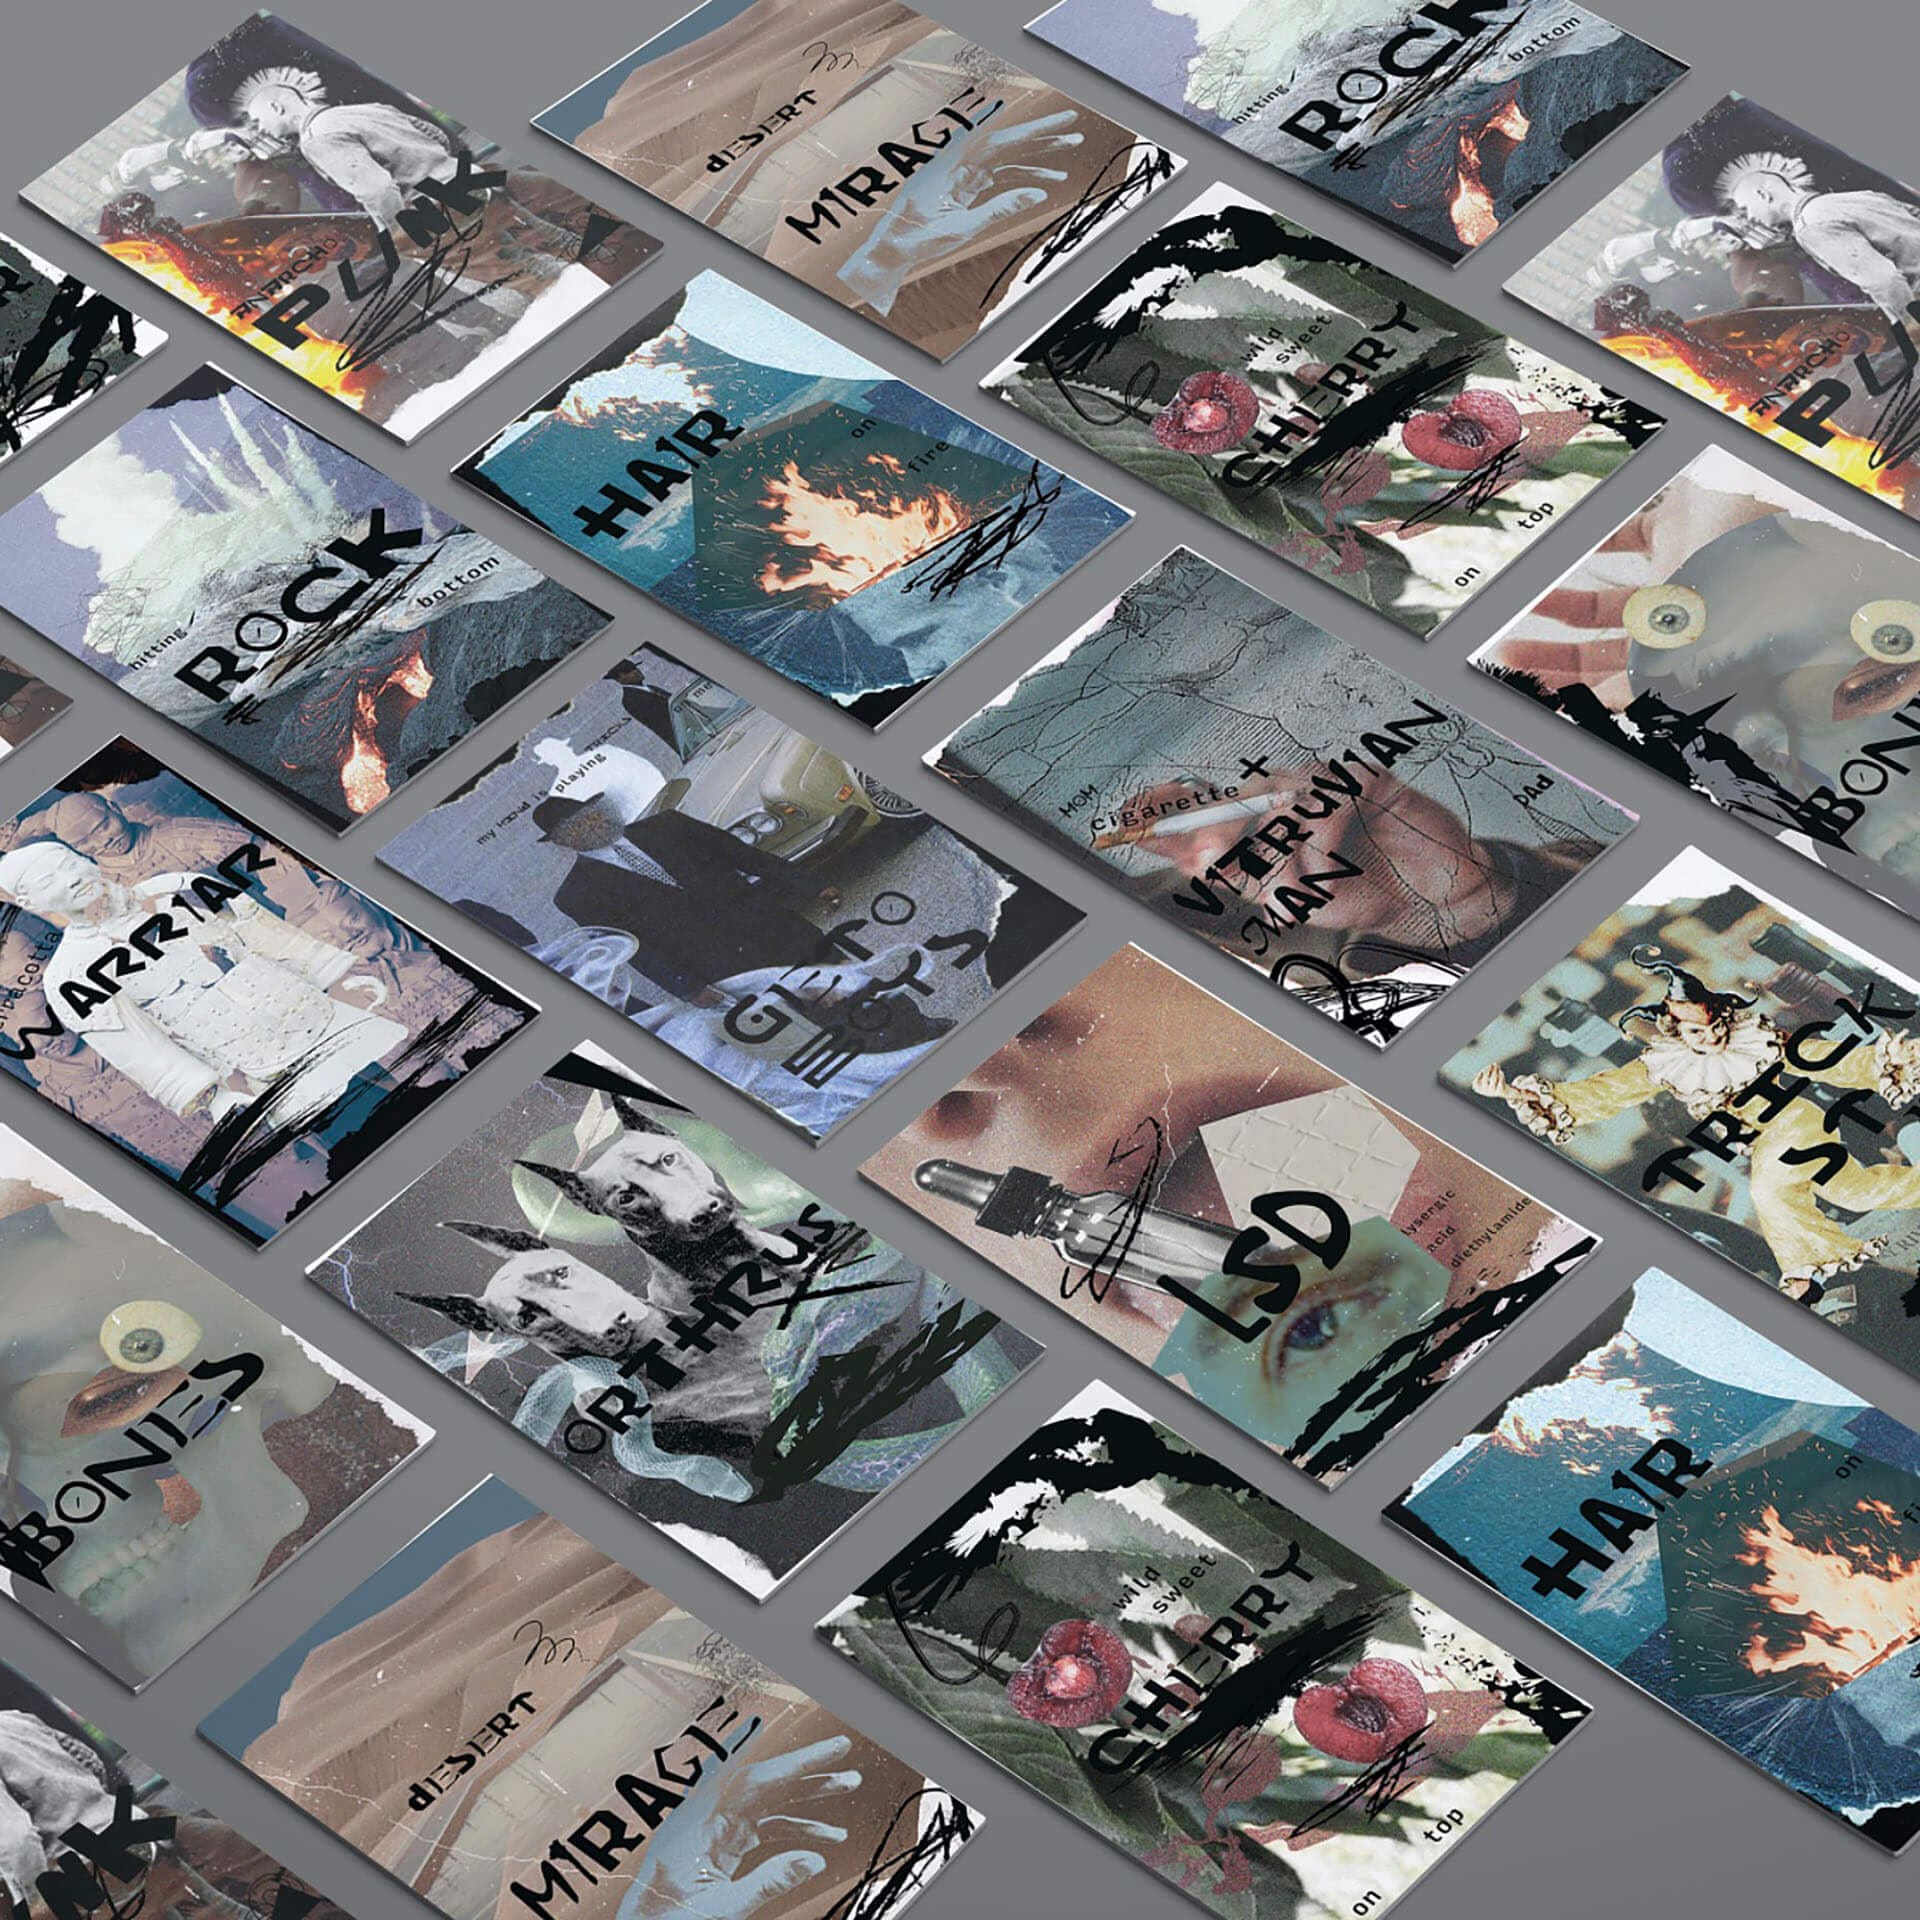 Several cards are laid out next to each other on a grey background. Each card features a different image with black text that related to the image.